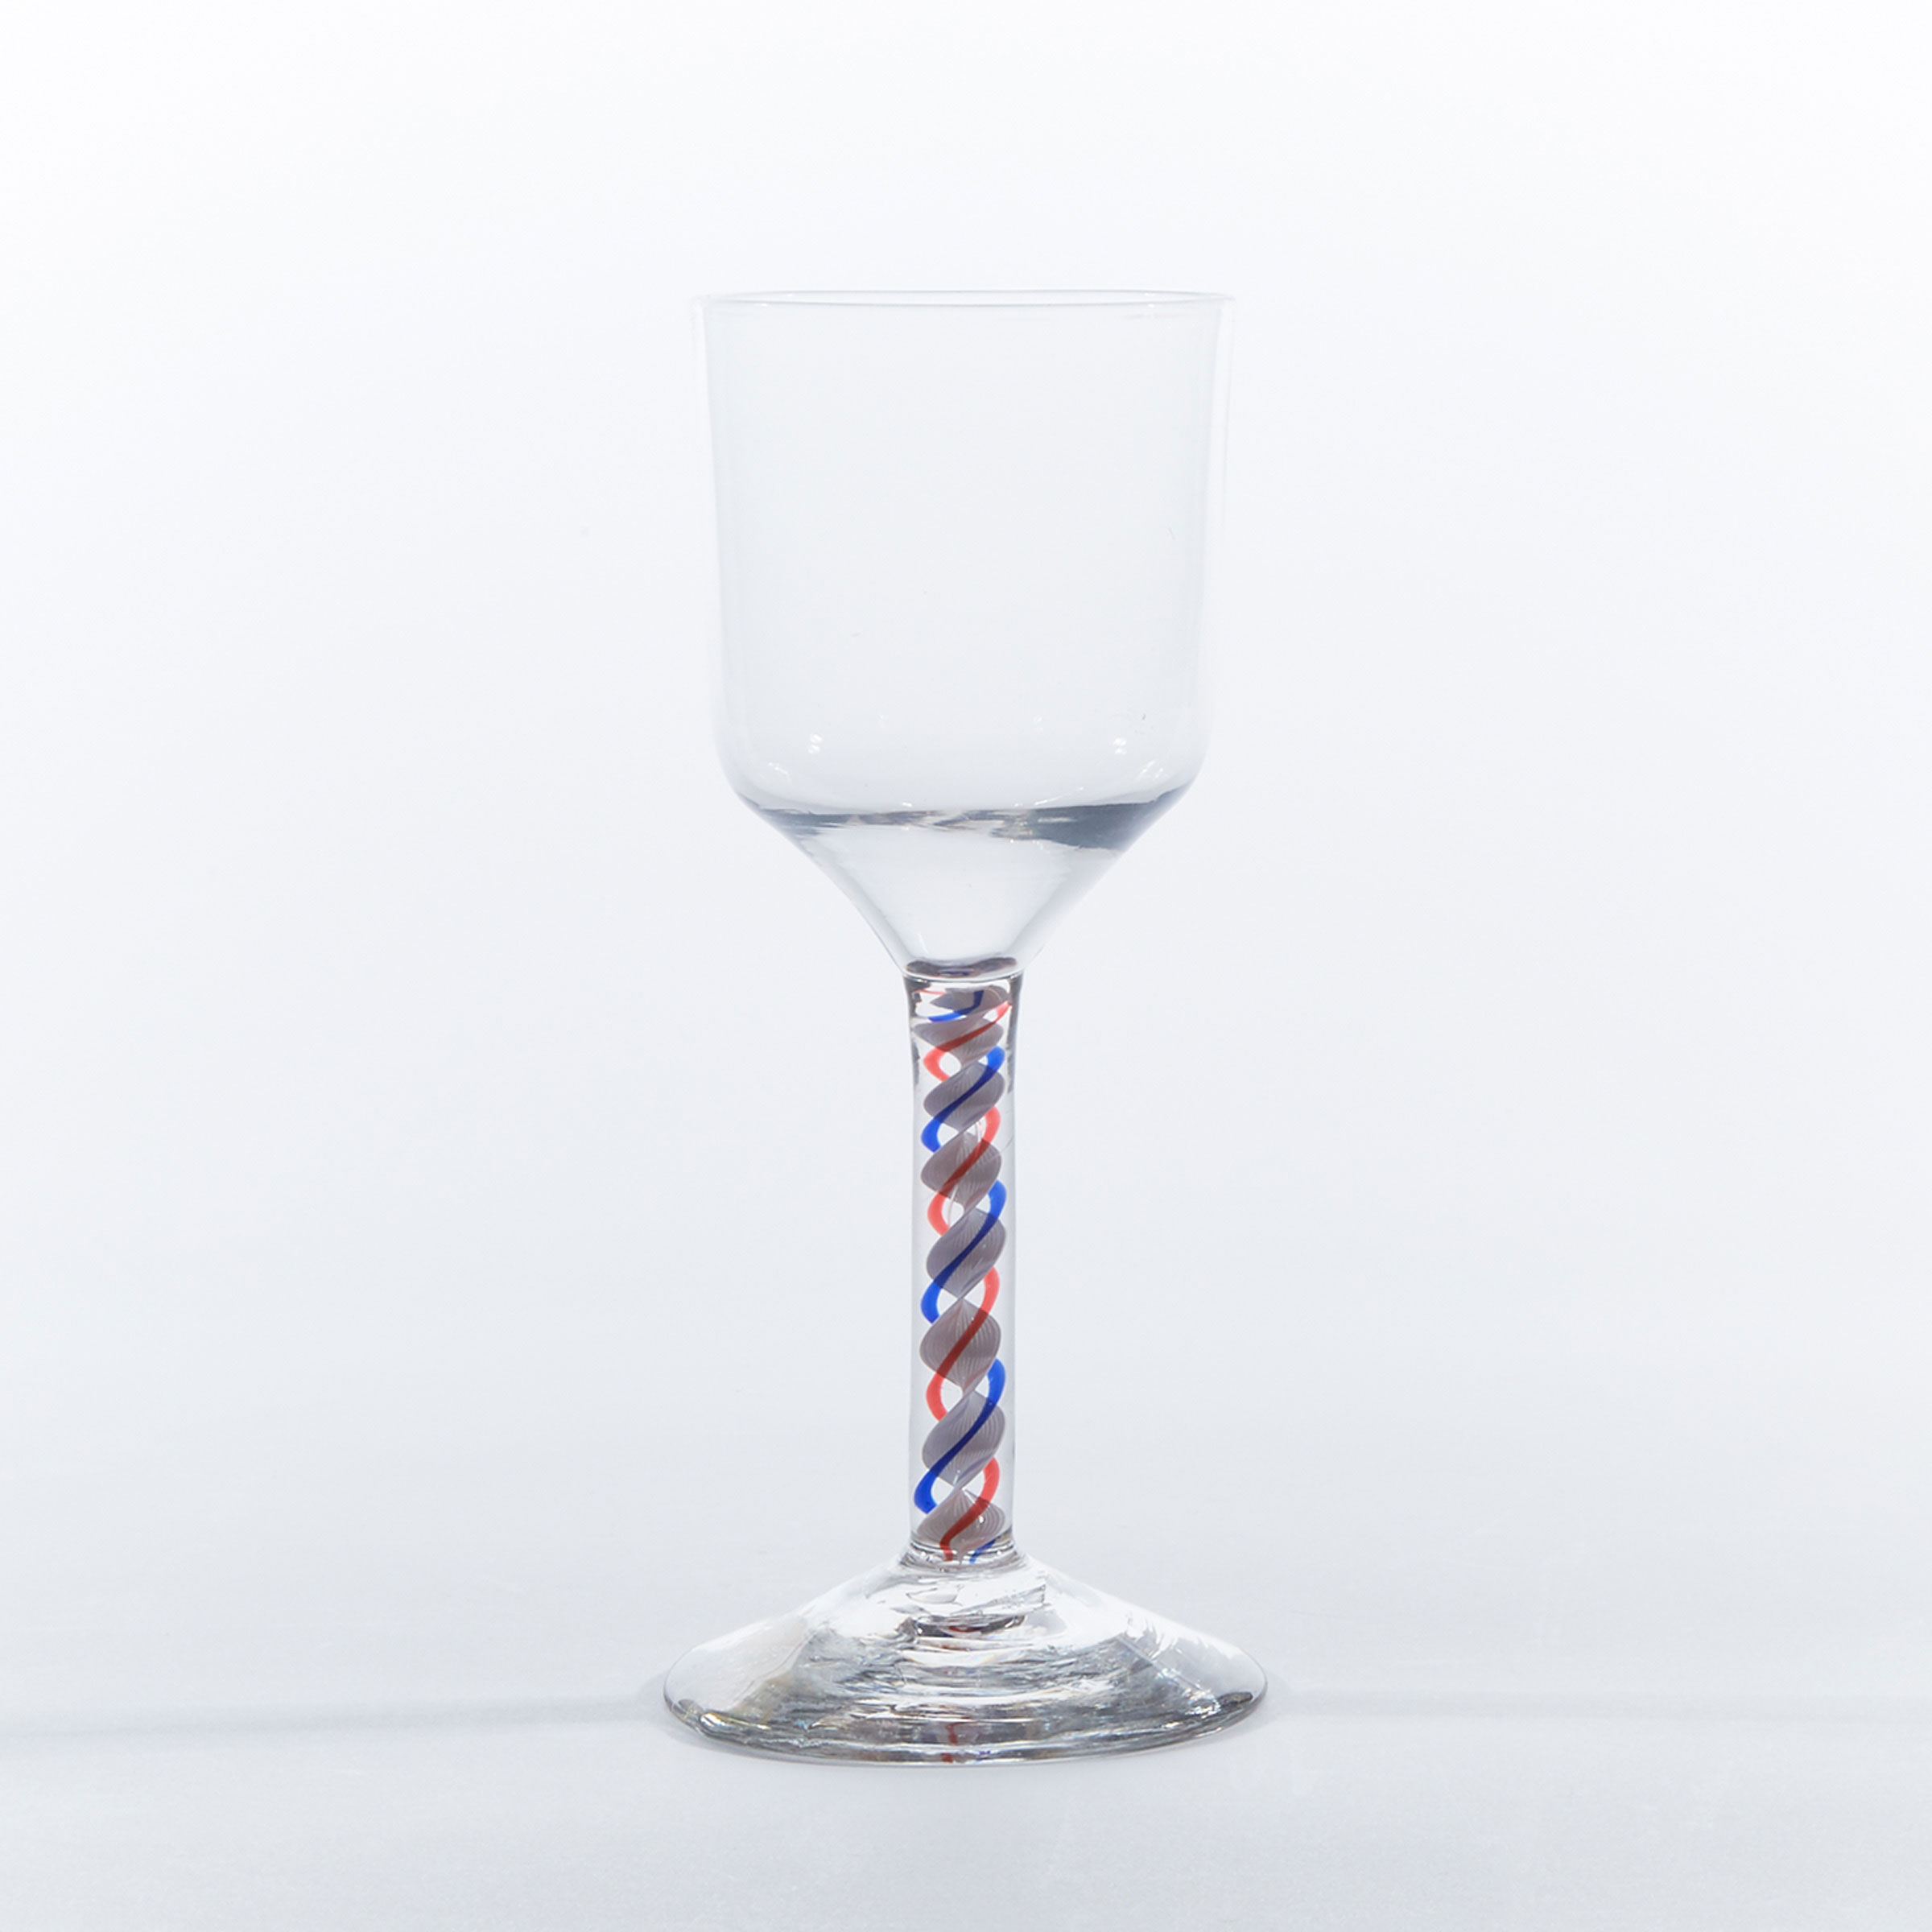 English Red, White and Blue Colour Twist Stemmed Glass Goblet, c.1760